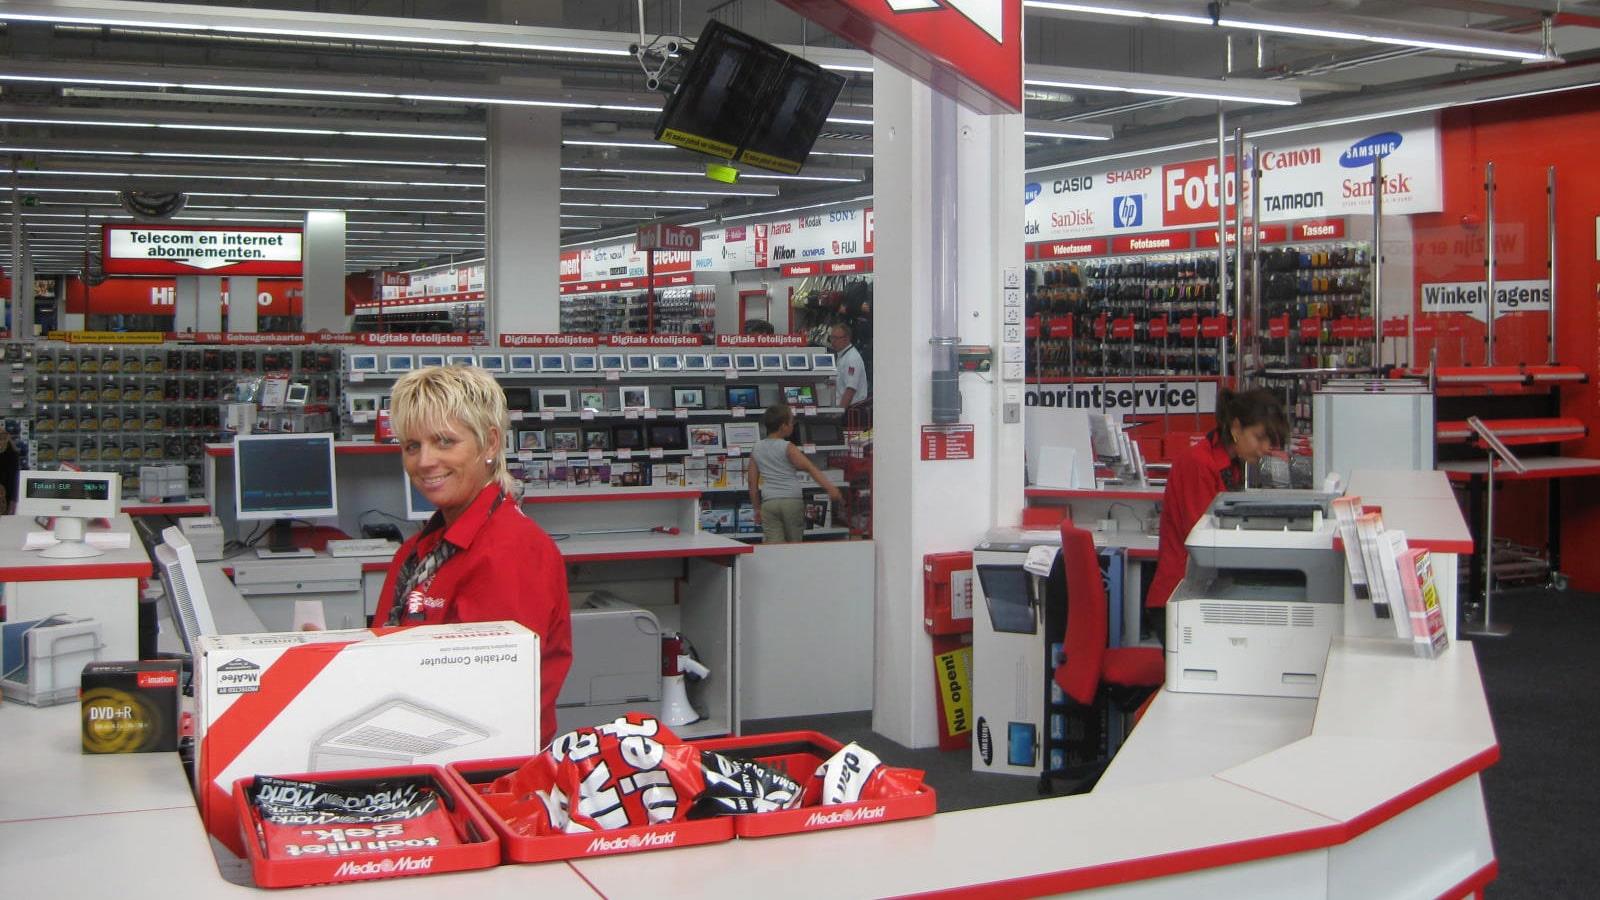 Two employees ready to help customers at Media Markt store